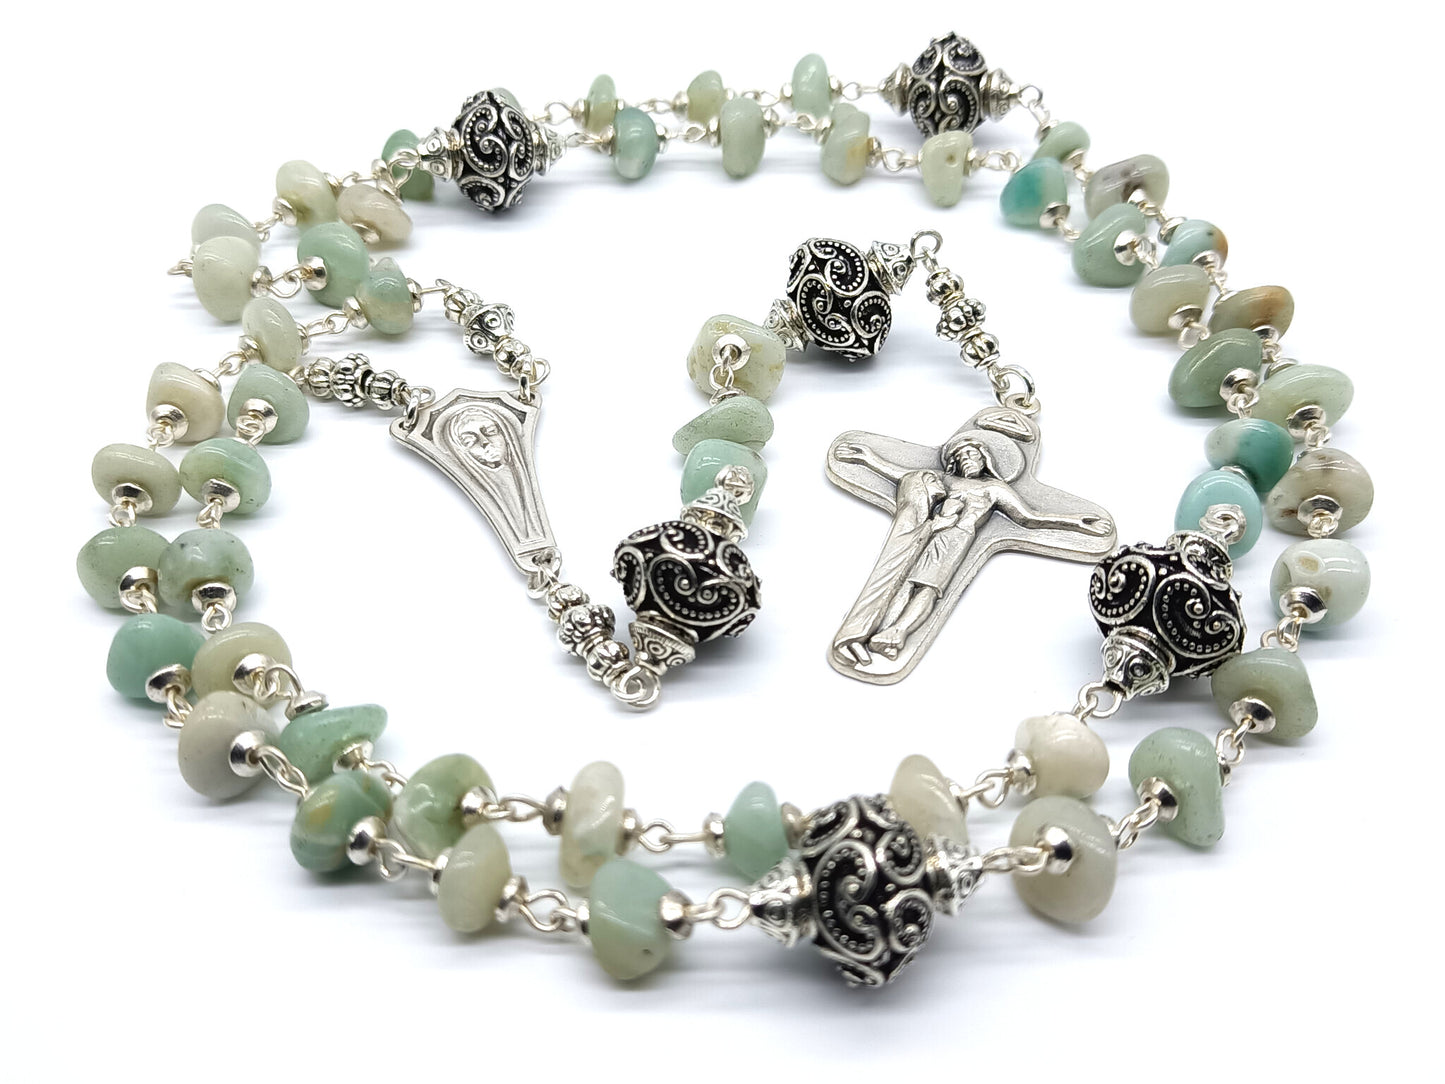 Virgin Mary unique rosary beads with amazonite gemstone beads, silver pater beads, crucifix and centre medal.